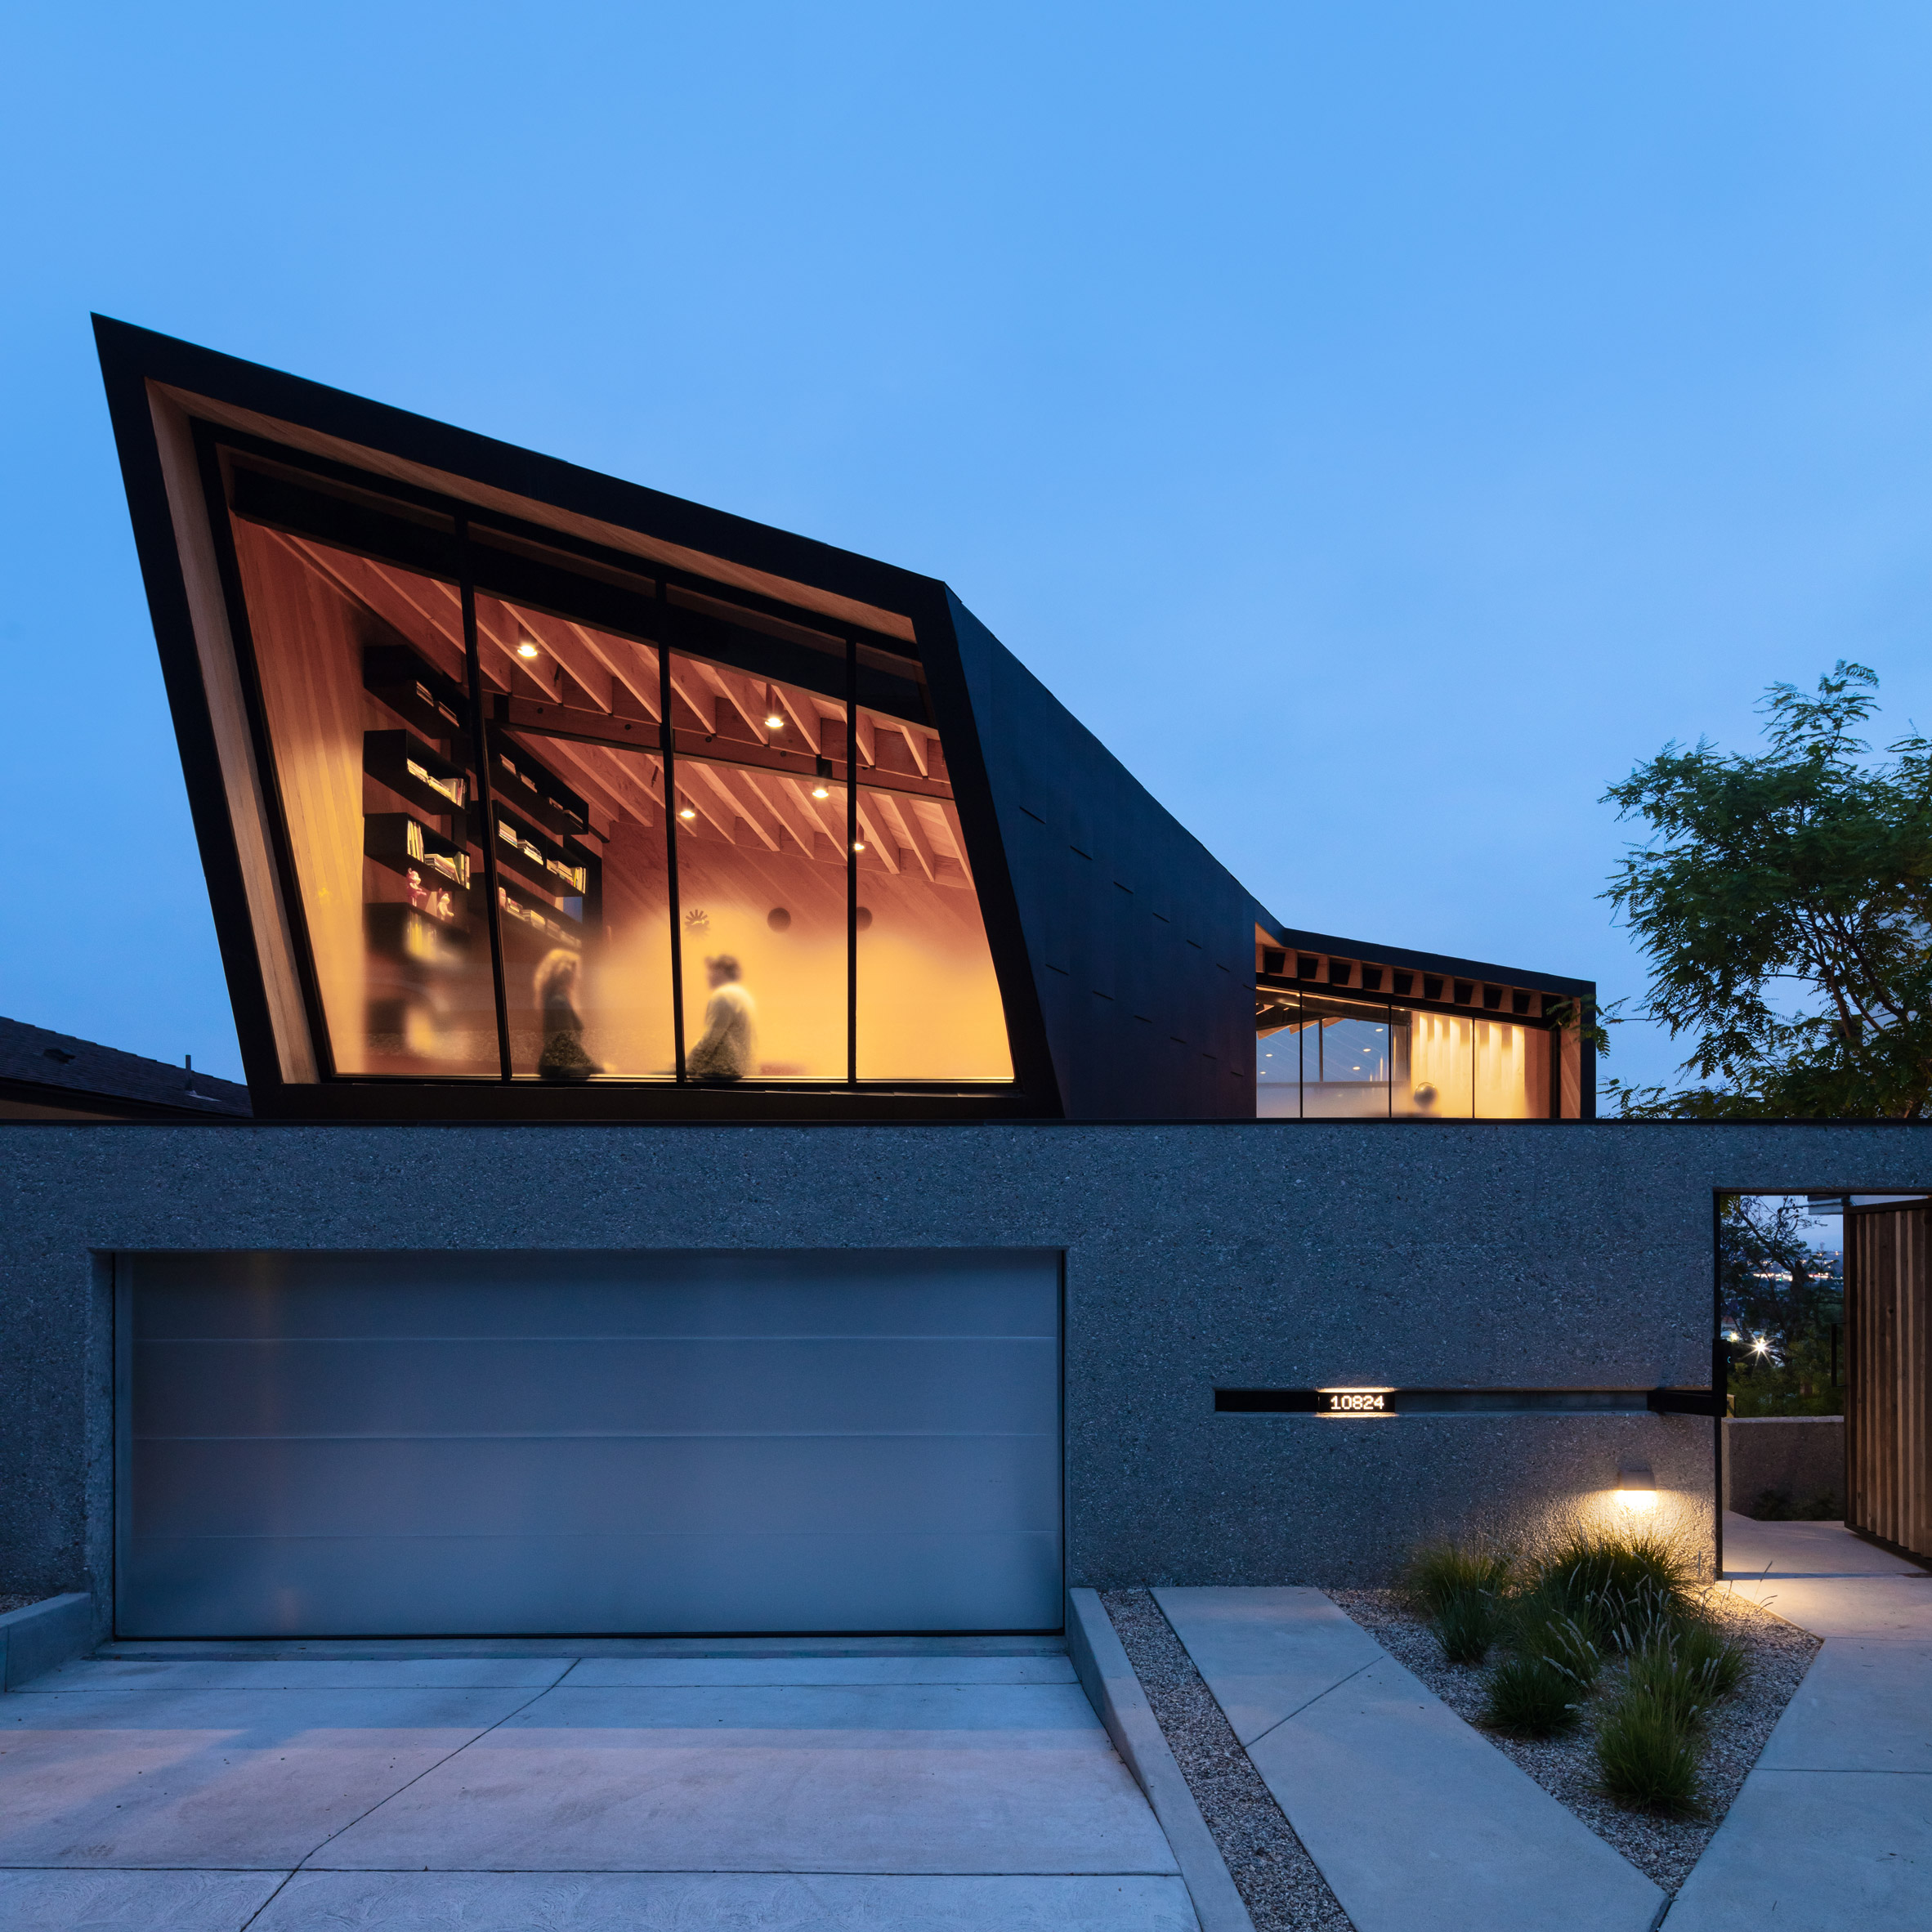 Project coordinator at Clive Wilkinson Architects in Culver City, California